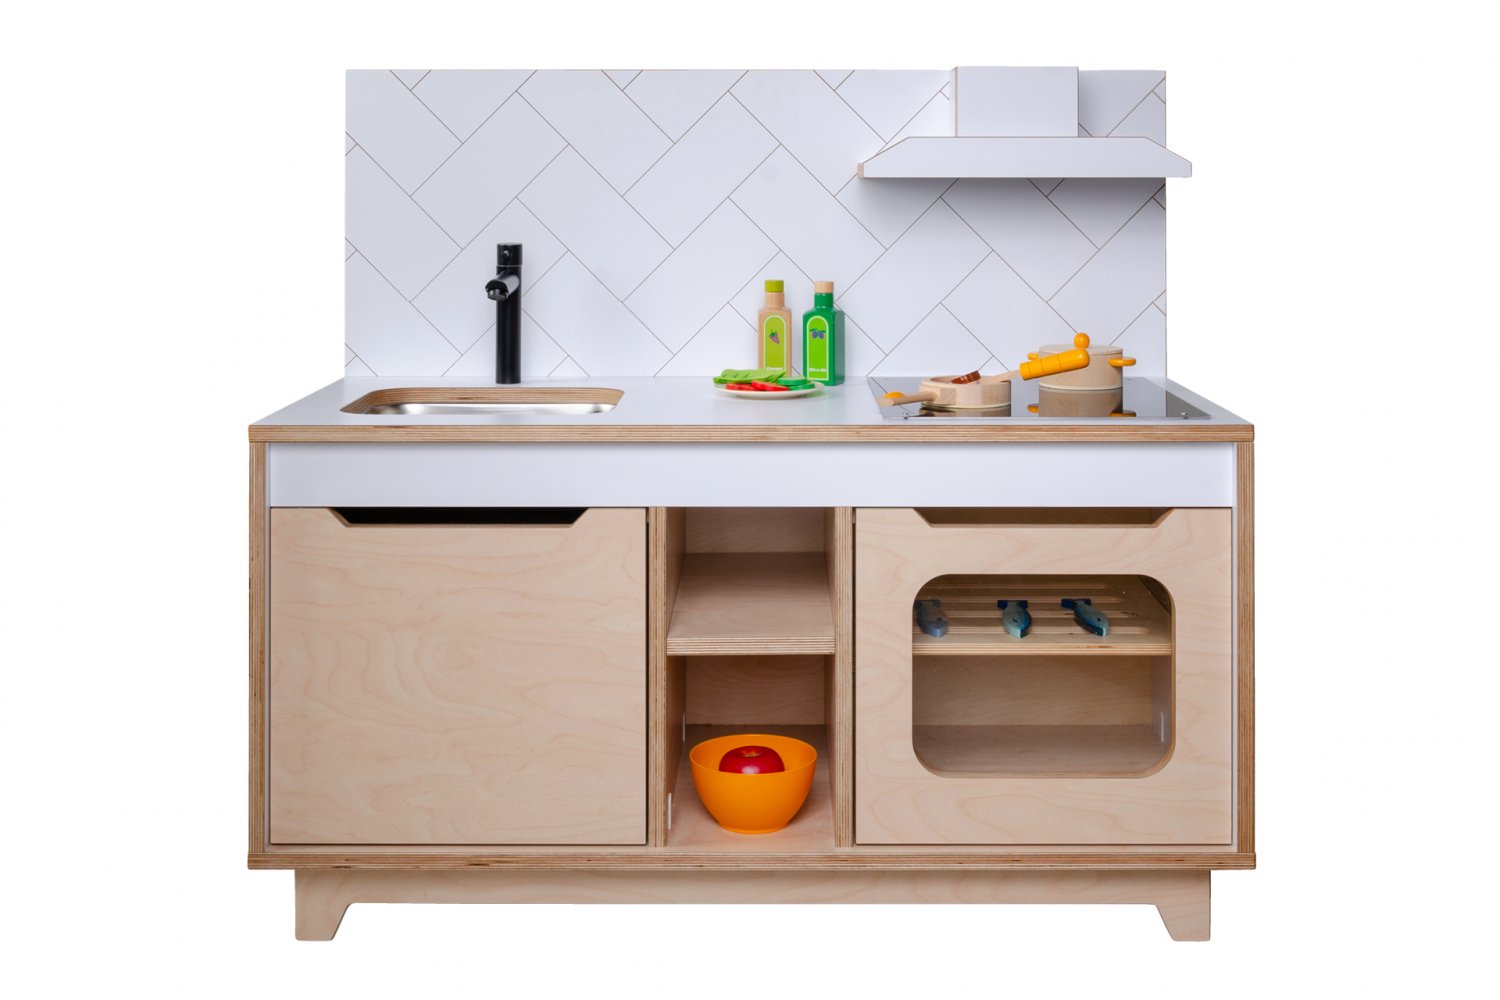 Wooden Plywood Kitchen for early learning WHITE